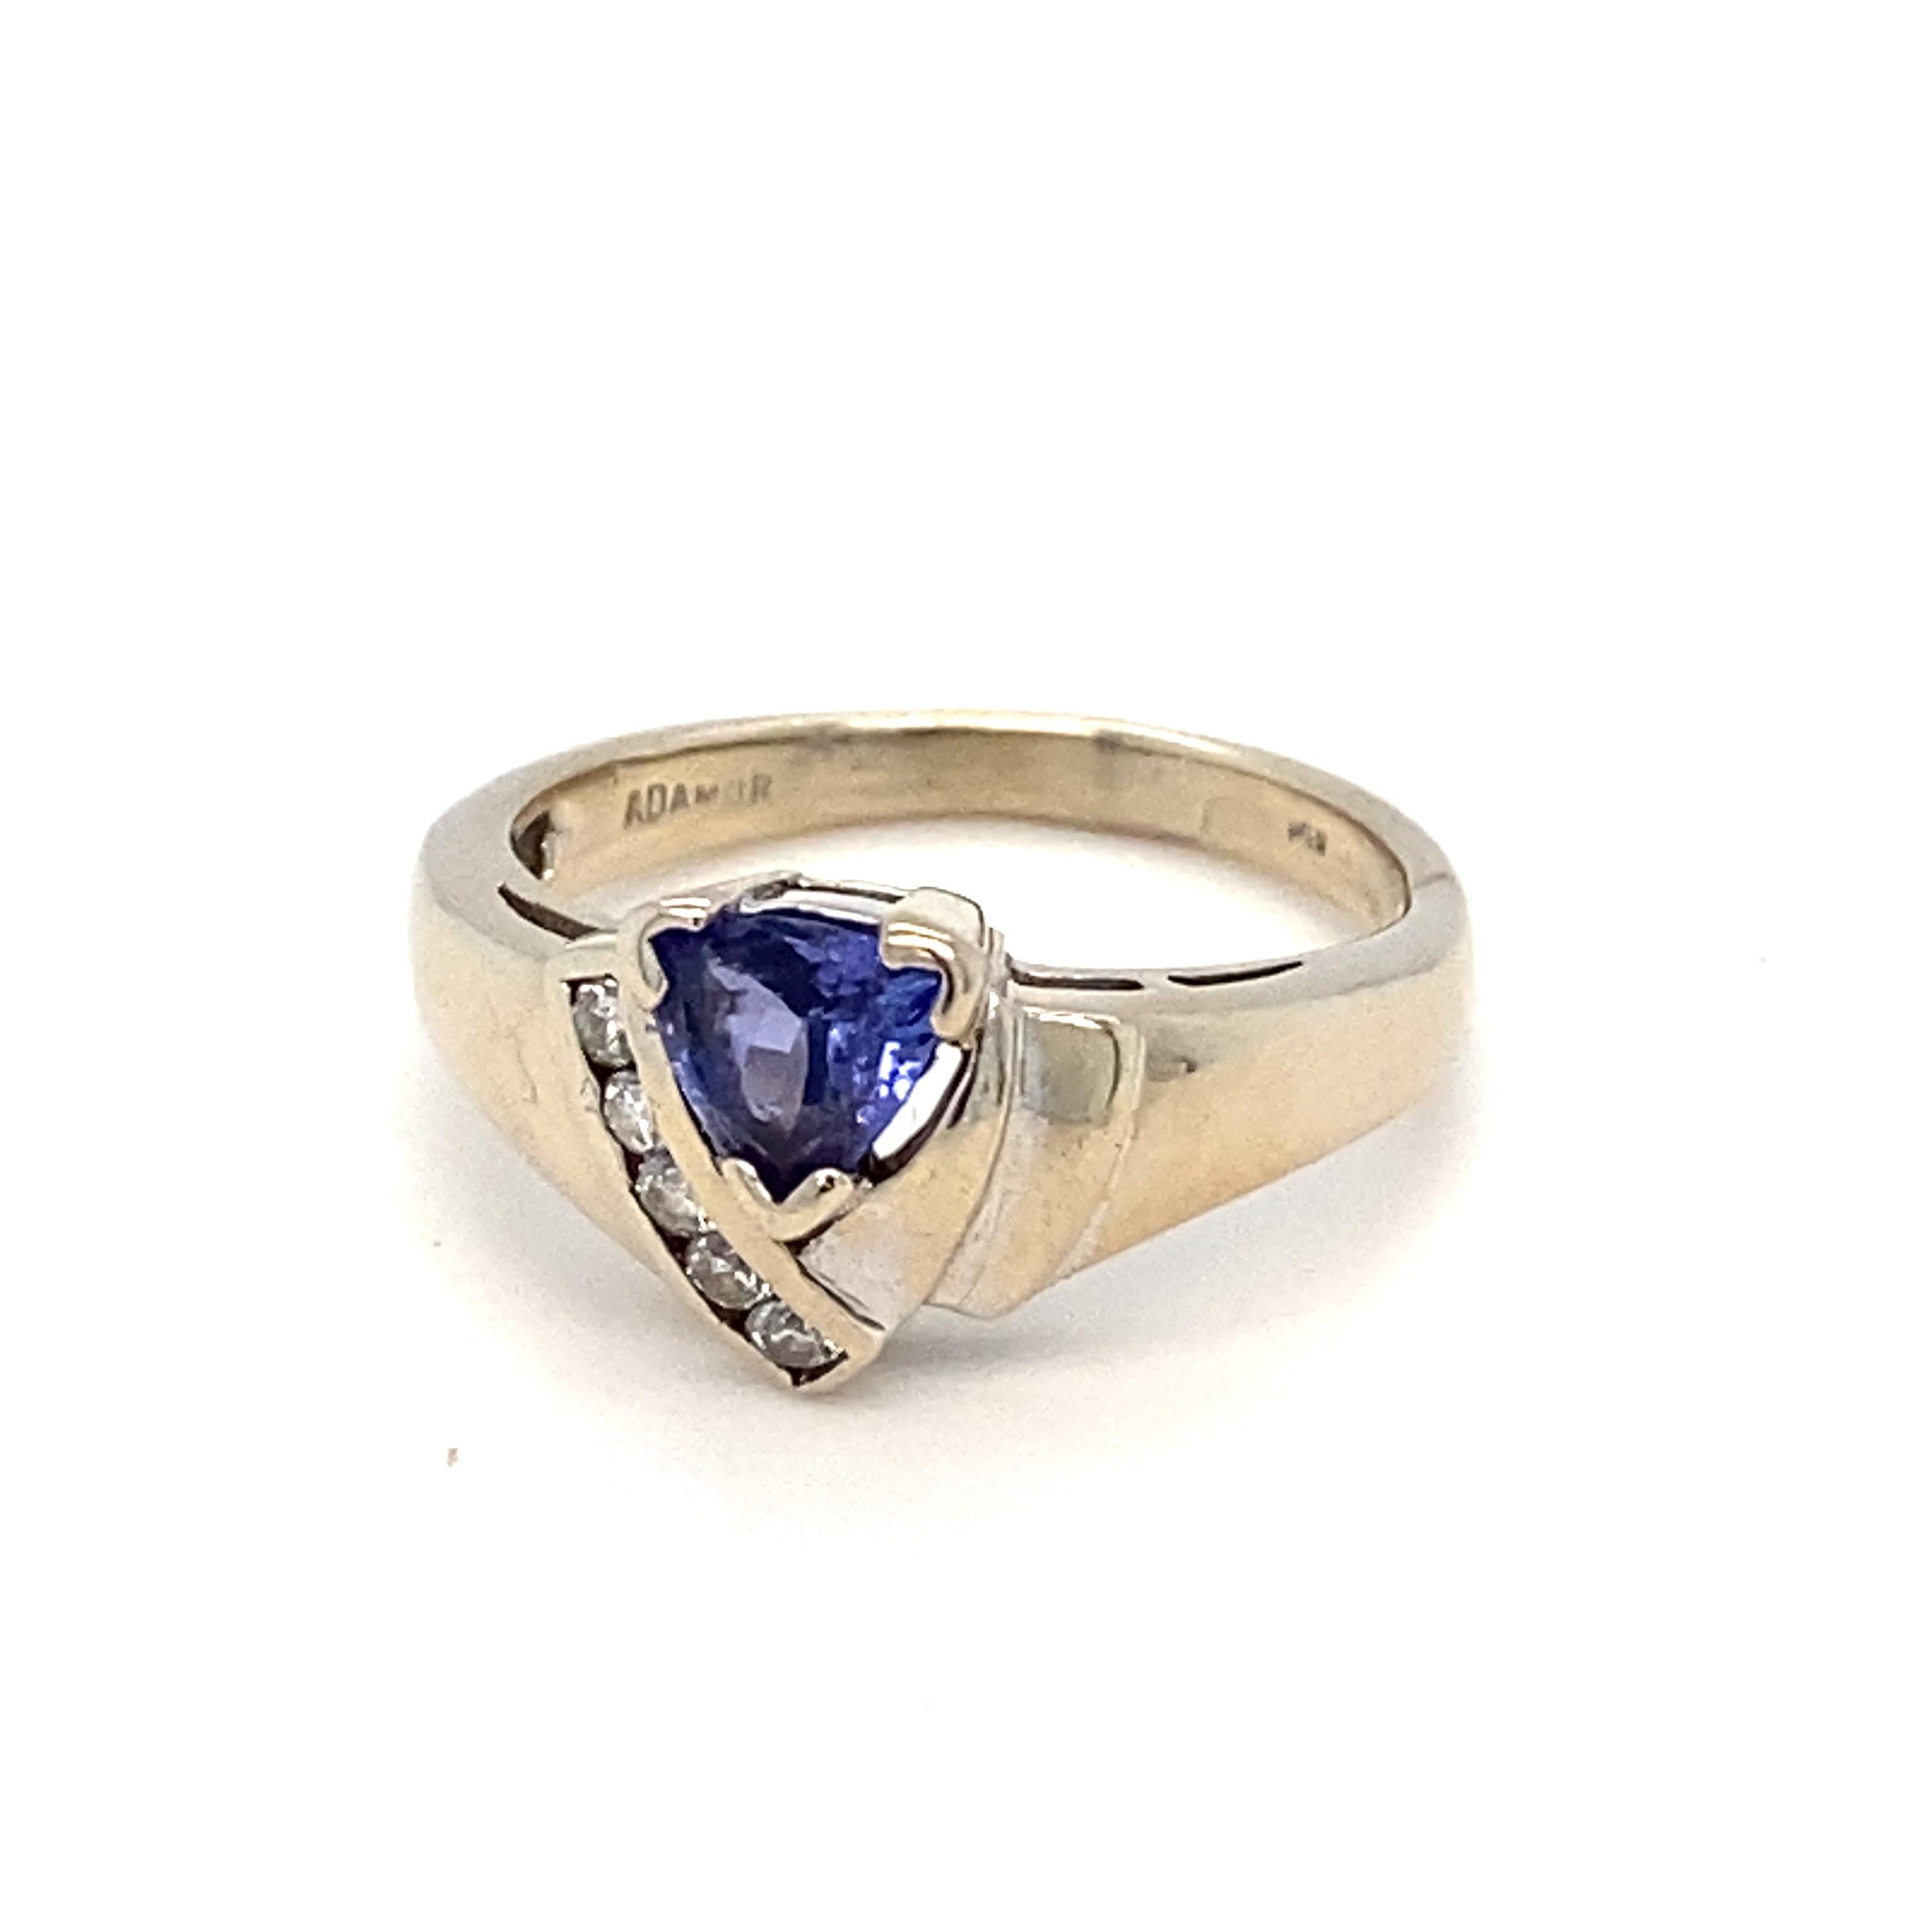 Trillion shape tanzanite with accent diamonds is a everyday wear ring. Set in 14K white gold. Size is resizable 7